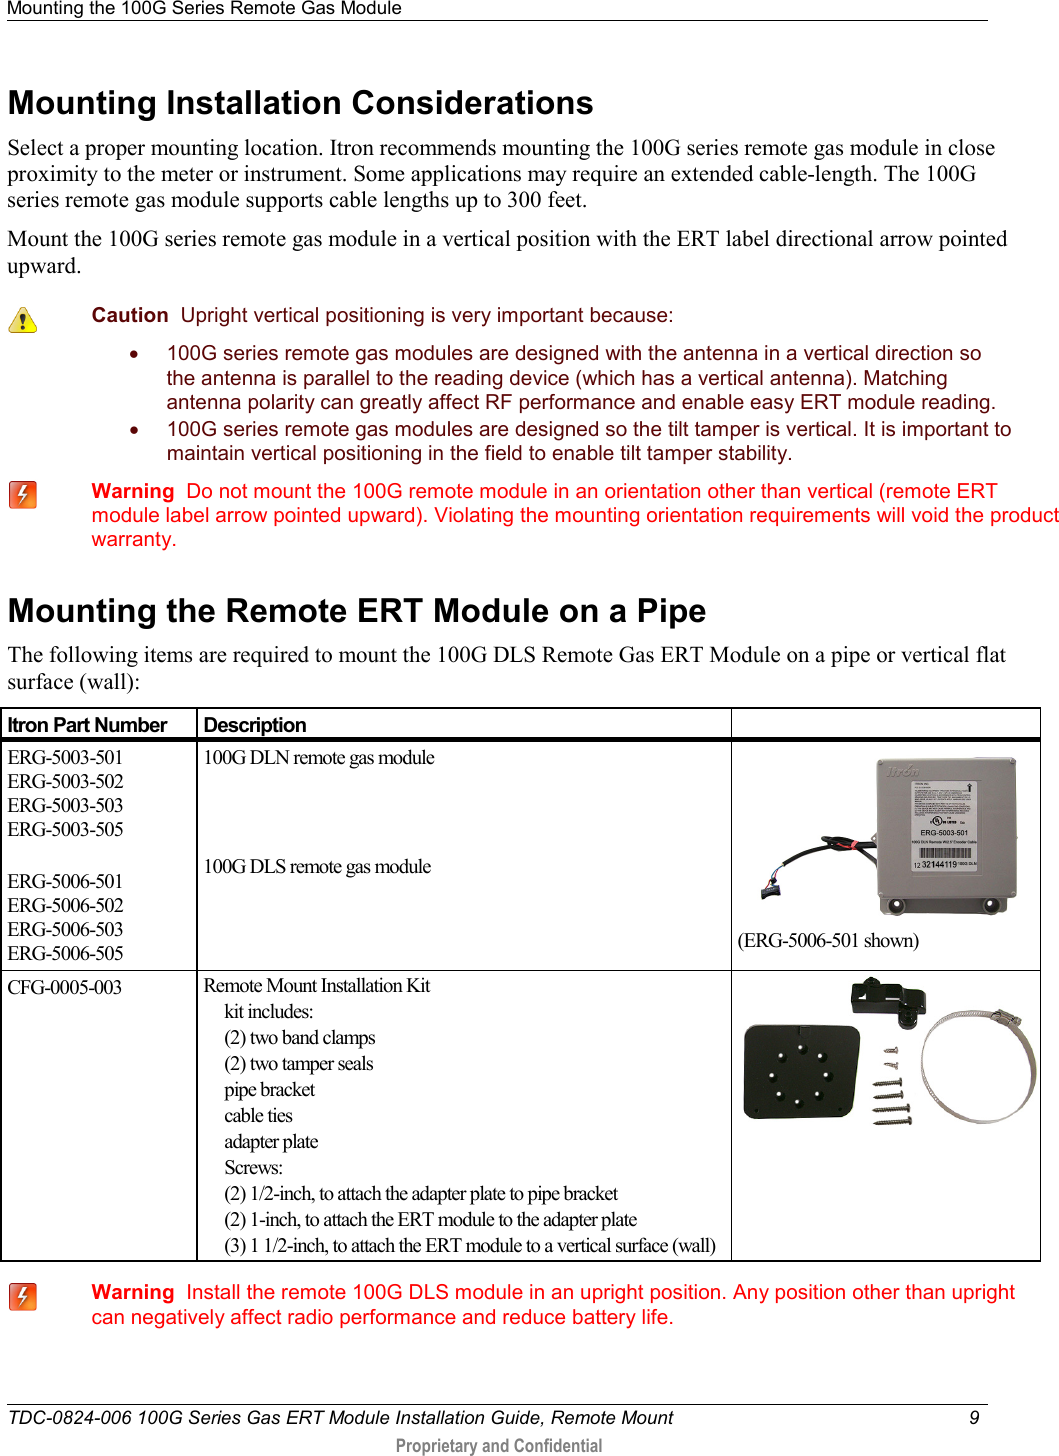 Mounting the 100G Series Remote Gas Module   TDC-0824-006 100G Series Gas ERT Module Installation Guide, Remote Mount  9   Proprietary and Confidential     Mounting Installation Considerations Select a proper mounting location. Itron recommends mounting the 100G series remote gas module in close proximity to the meter or instrument. Some applications may require an extended cable-length. The 100G series remote gas module supports cable lengths up to 300 feet.  Mount the 100G series remote gas module in a vertical position with the ERT label directional arrow pointed upward.   Caution  Upright vertical positioning is very important because: • 100G series remote gas modules are designed with the antenna in a vertical direction so the antenna is parallel to the reading device (which has a vertical antenna). Matching antenna polarity can greatly affect RF performance and enable easy ERT module reading. • 100G series remote gas modules are designed so the tilt tamper is vertical. It is important to maintain vertical positioning in the field to enable tilt tamper stability.  Warning  Do not mount the 100G remote module in an orientation other than vertical (remote ERT module label arrow pointed upward). Violating the mounting orientation requirements will void the product warranty.     Mounting the Remote ERT Module on a Pipe The following items are required to mount the 100G DLS Remote Gas ERT Module on a pipe or vertical flat surface (wall): Itron Part Number Description  ERG-5003-501 ERG-5003-502 ERG-5003-503 ERG-5003-505  ERG-5006-501 ERG-5006-502 ERG-5006-503 ERG-5006-505 100G DLN remote gas module    100G DLS remote gas module   (ERG-5006-501 shown) CFG-0005-003 Remote Mount Installation Kit                          kit includes:       (2) two band clamps      (2) two tamper seals      pipe bracket      cable ties      adapter plate      Screws:      (2) 1/2-inch, to attach the adapter plate to pipe bracket      (2) 1-inch, to attach the ERT module to the adapter plate      (3) 1 1/2-inch, to attach the ERT module to a vertical surface (wall)    Warning  Install the remote 100G DLS module in an upright position. Any position other than upright can negatively affect radio performance and reduce battery life.  